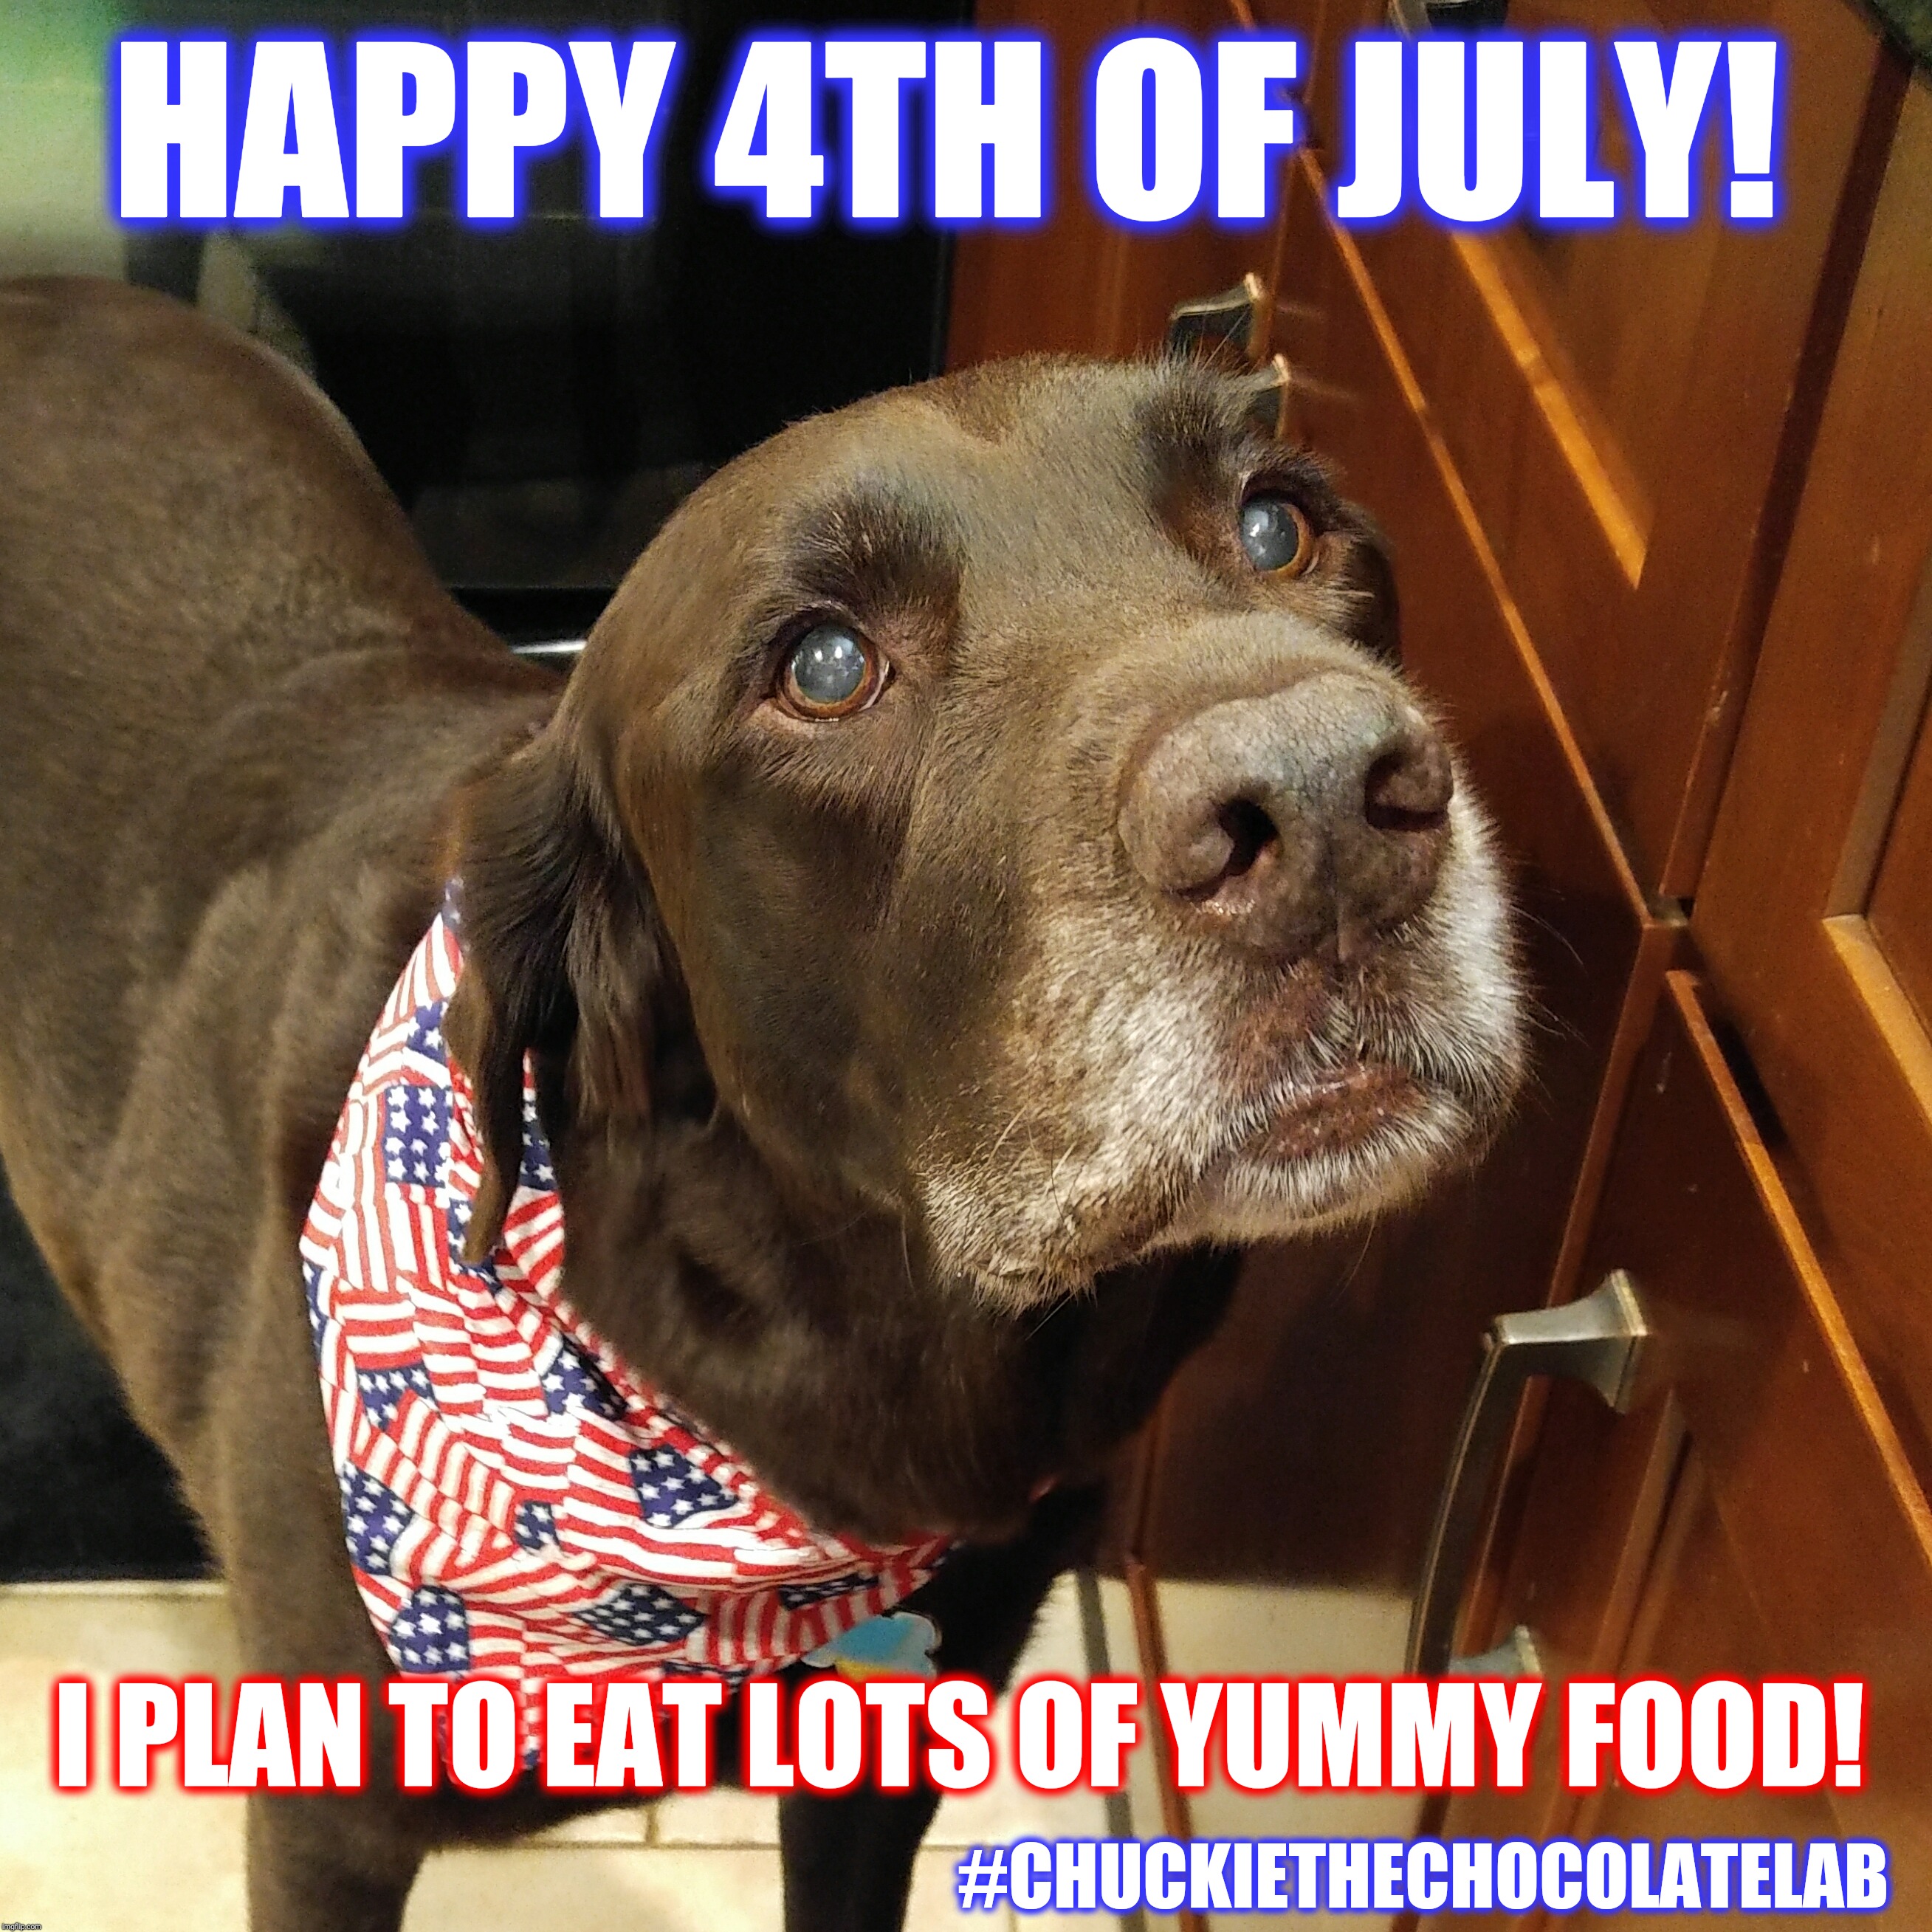 Happy 4th of July!  | HAPPY 4TH OF JULY! I PLAN TO EAT LOTS OF YUMMY FOOD! #CHUCKIETHECHOCOLATELAB | image tagged in chuckiethechocolatelab,dogs,july 4th,4th of july,holidays,memes | made w/ Imgflip meme maker